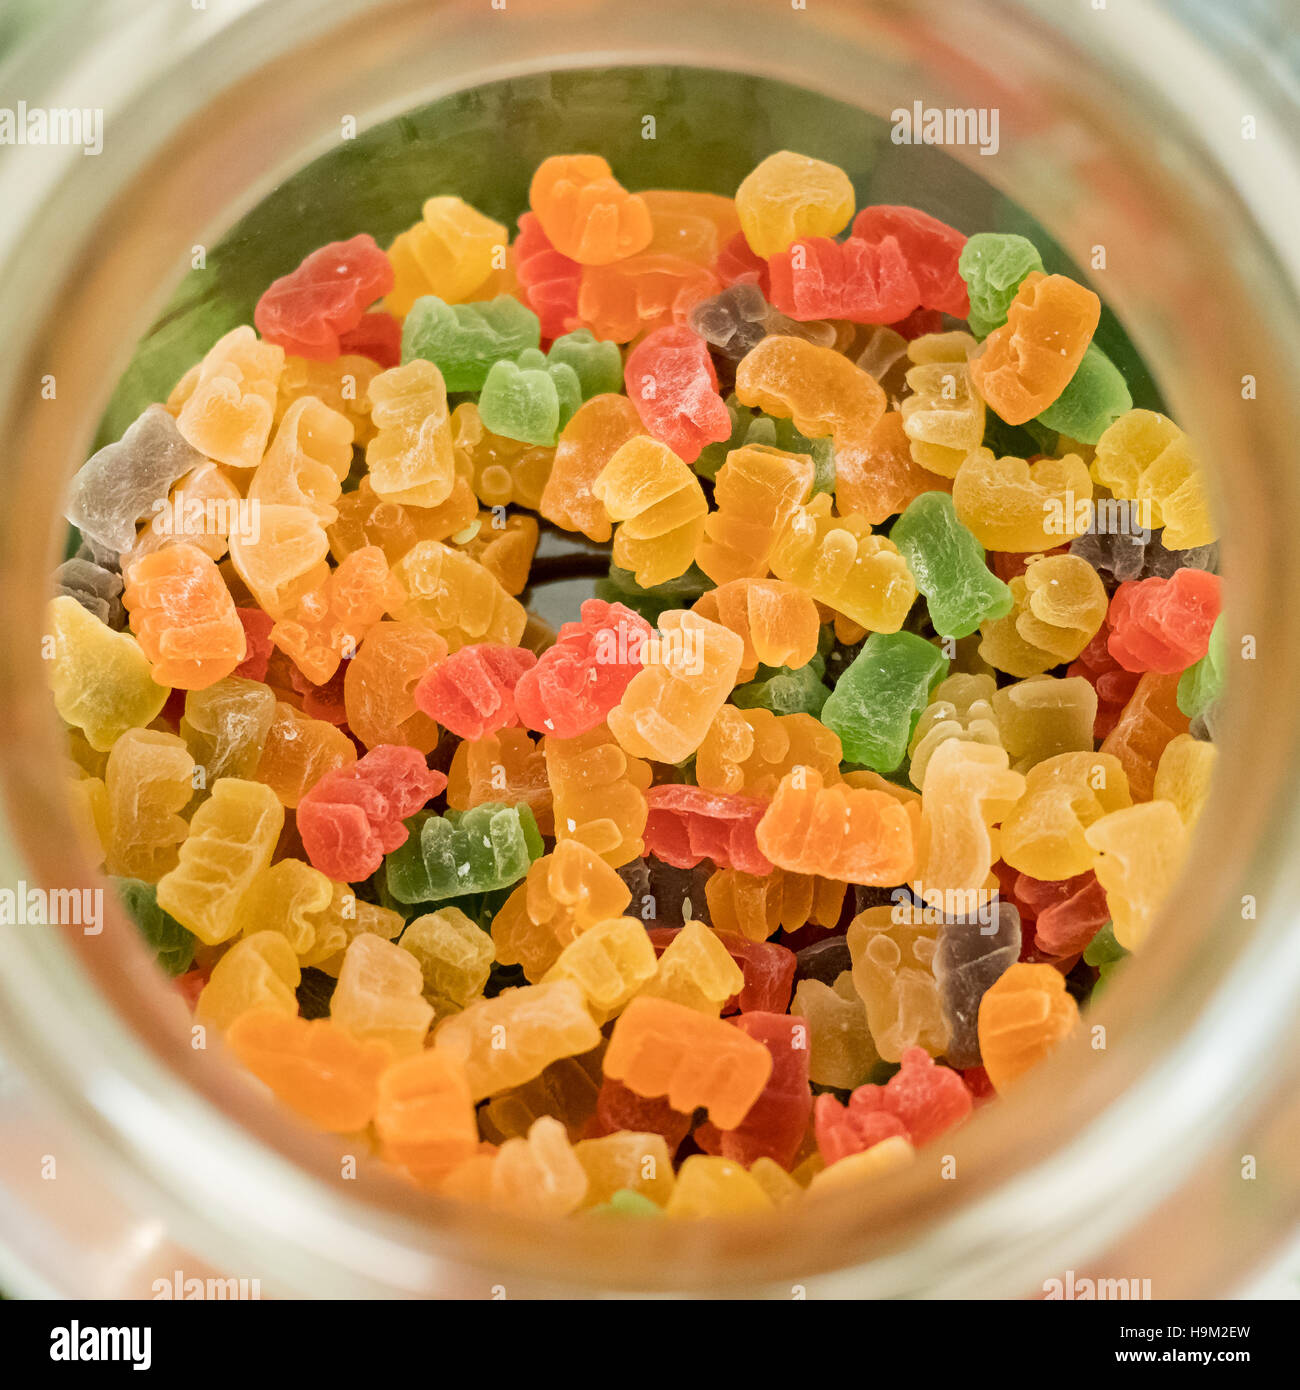 gummy jelly bear in a jar from top view Stock Photo